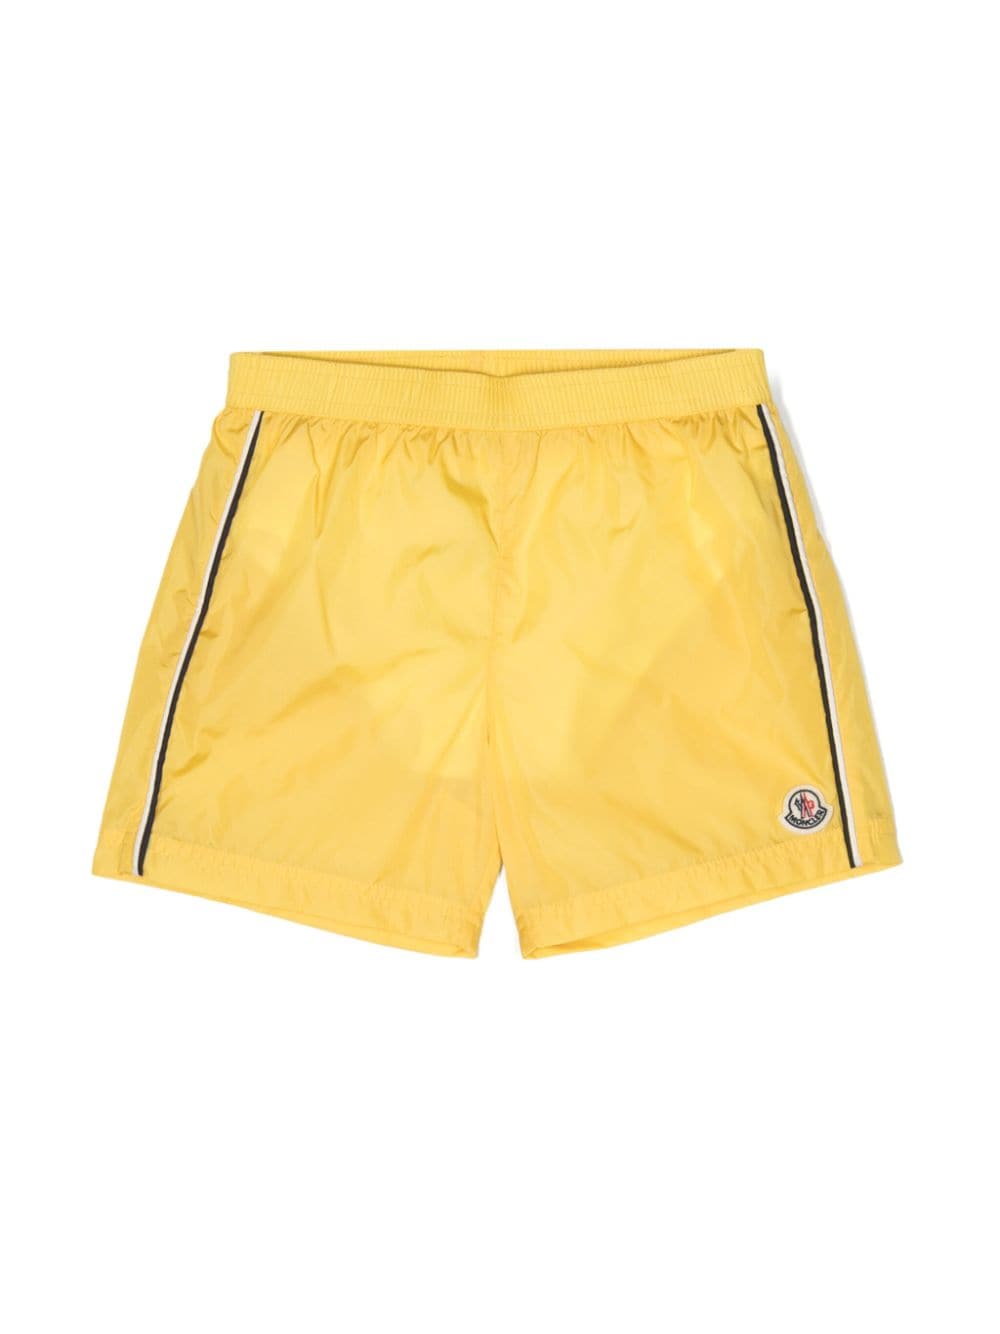 Yellow costume for boys with logo